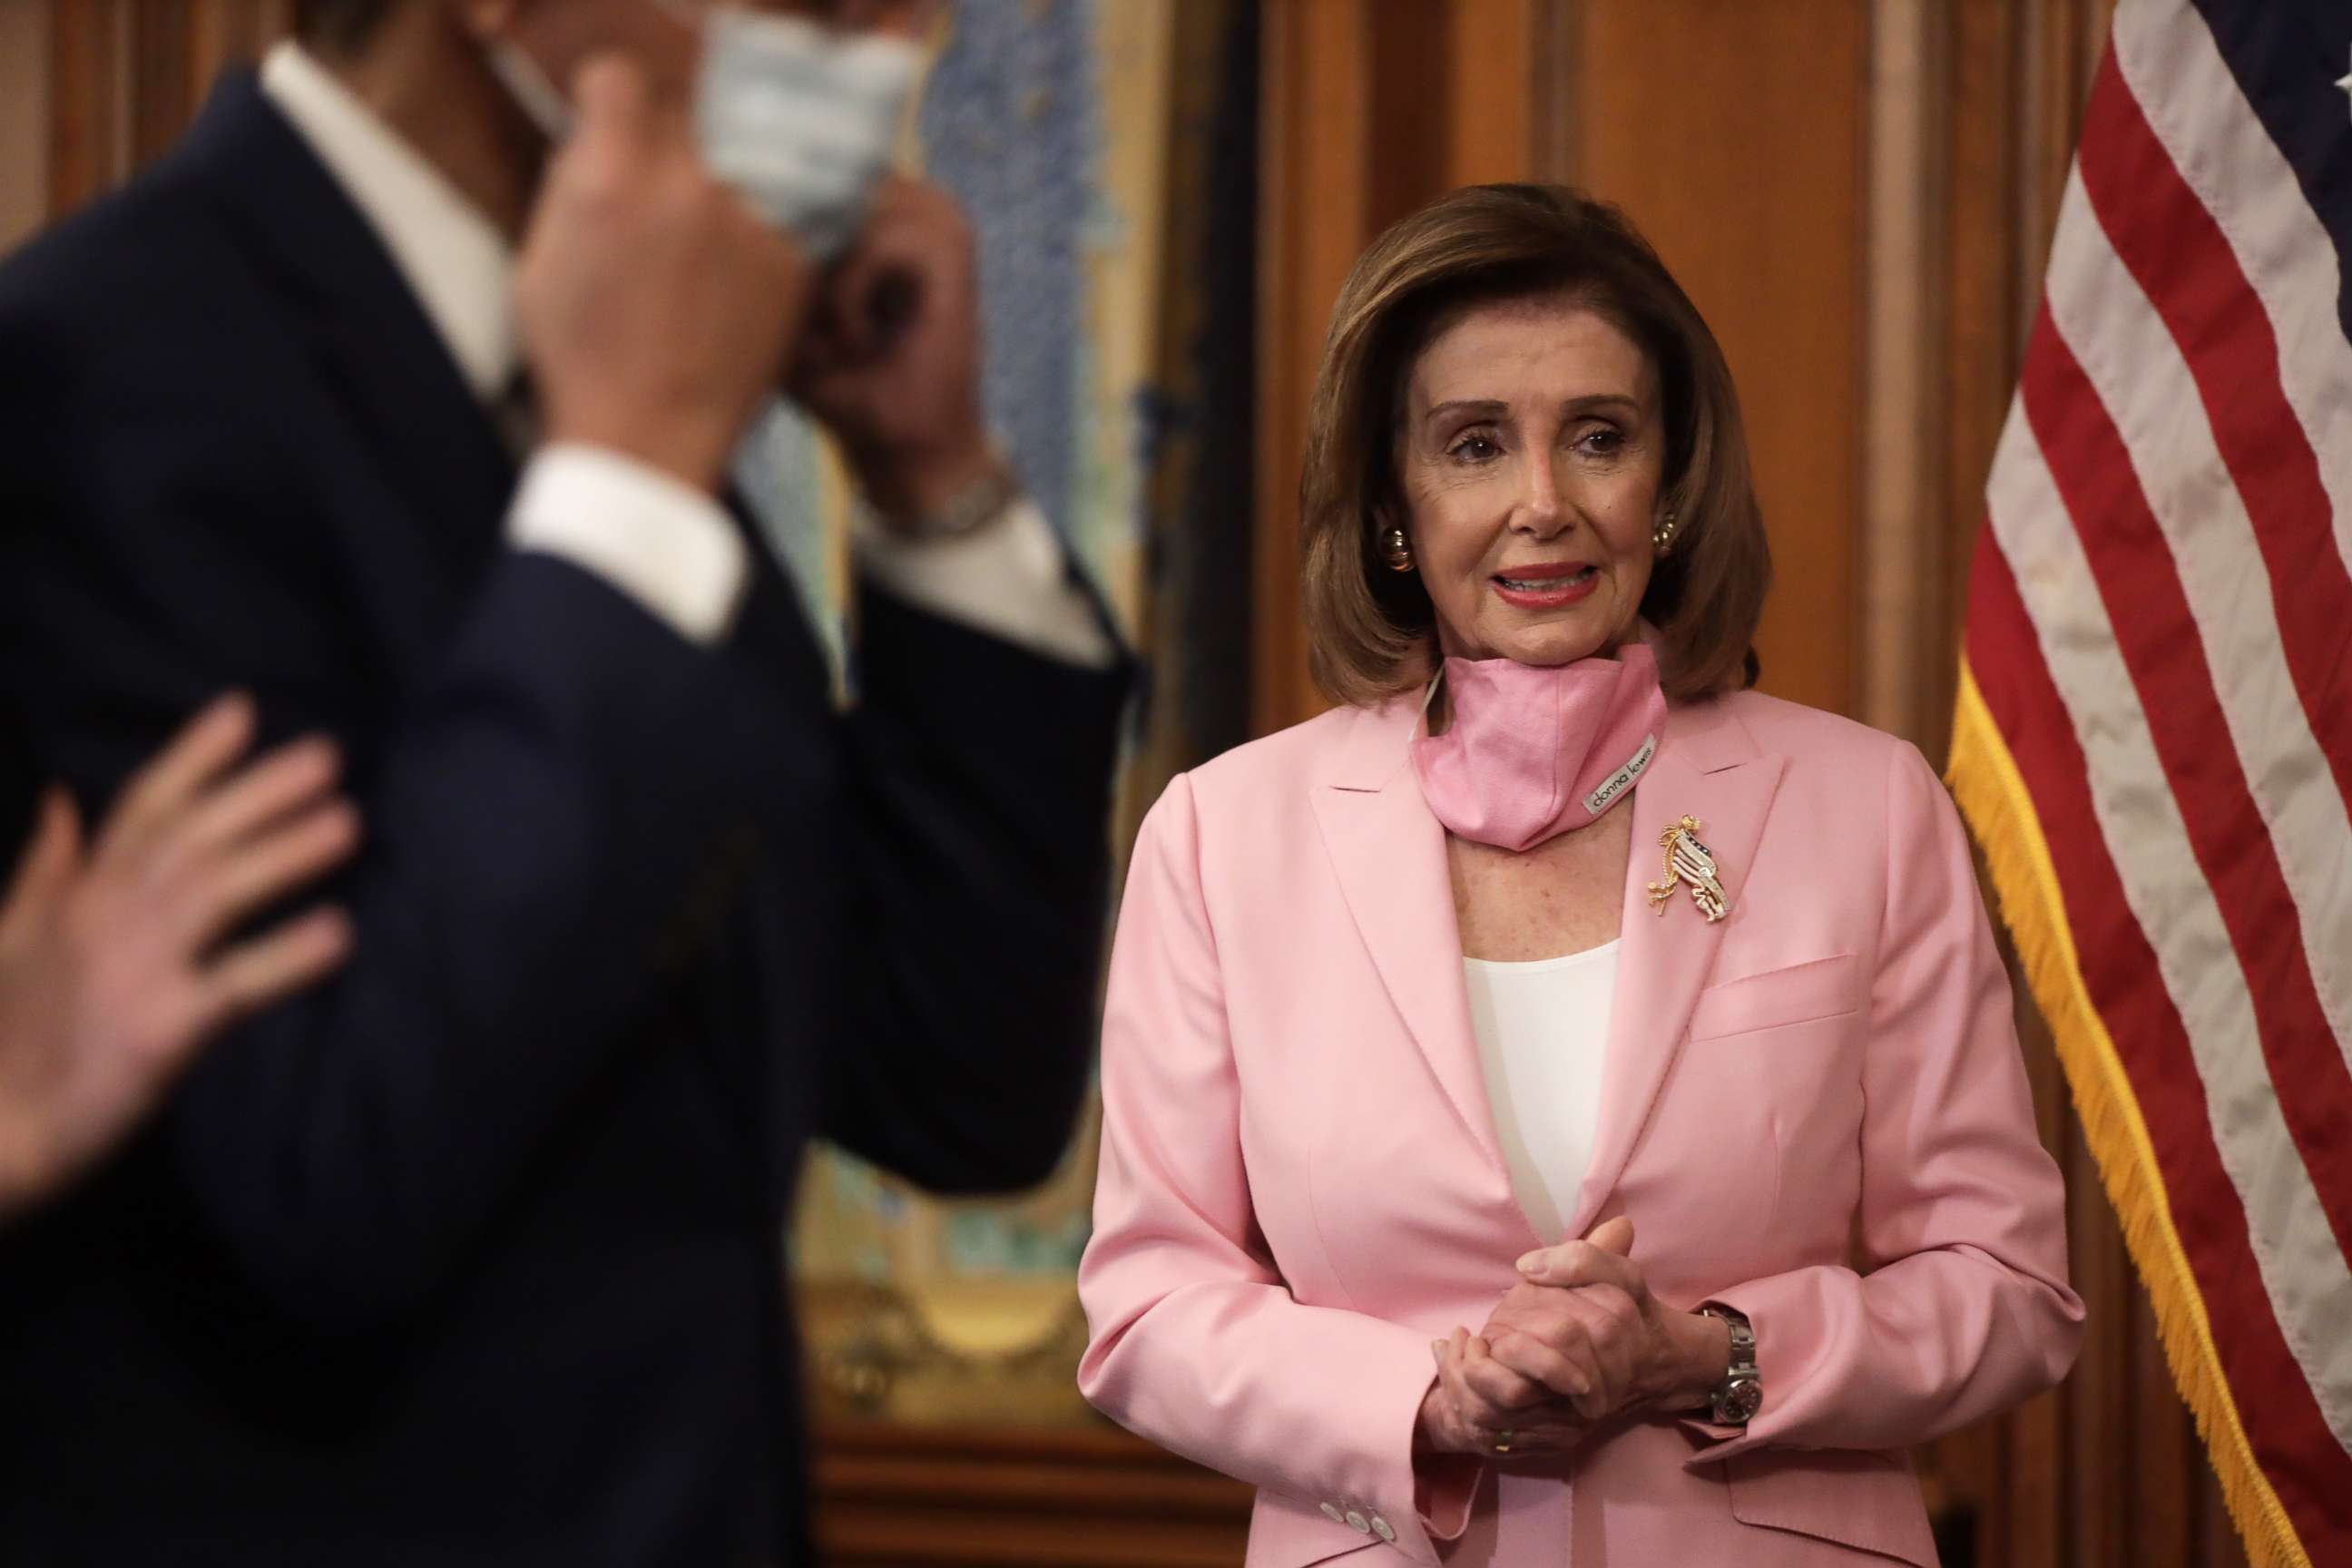 PHOTO: Speaker of the House Rep. Nancy Pelosi is seen during a ceremonial swearing-in for Rep. Kweisi Mfume at the U.S. Capitol, May 5, 2020, in Washington, D.C.